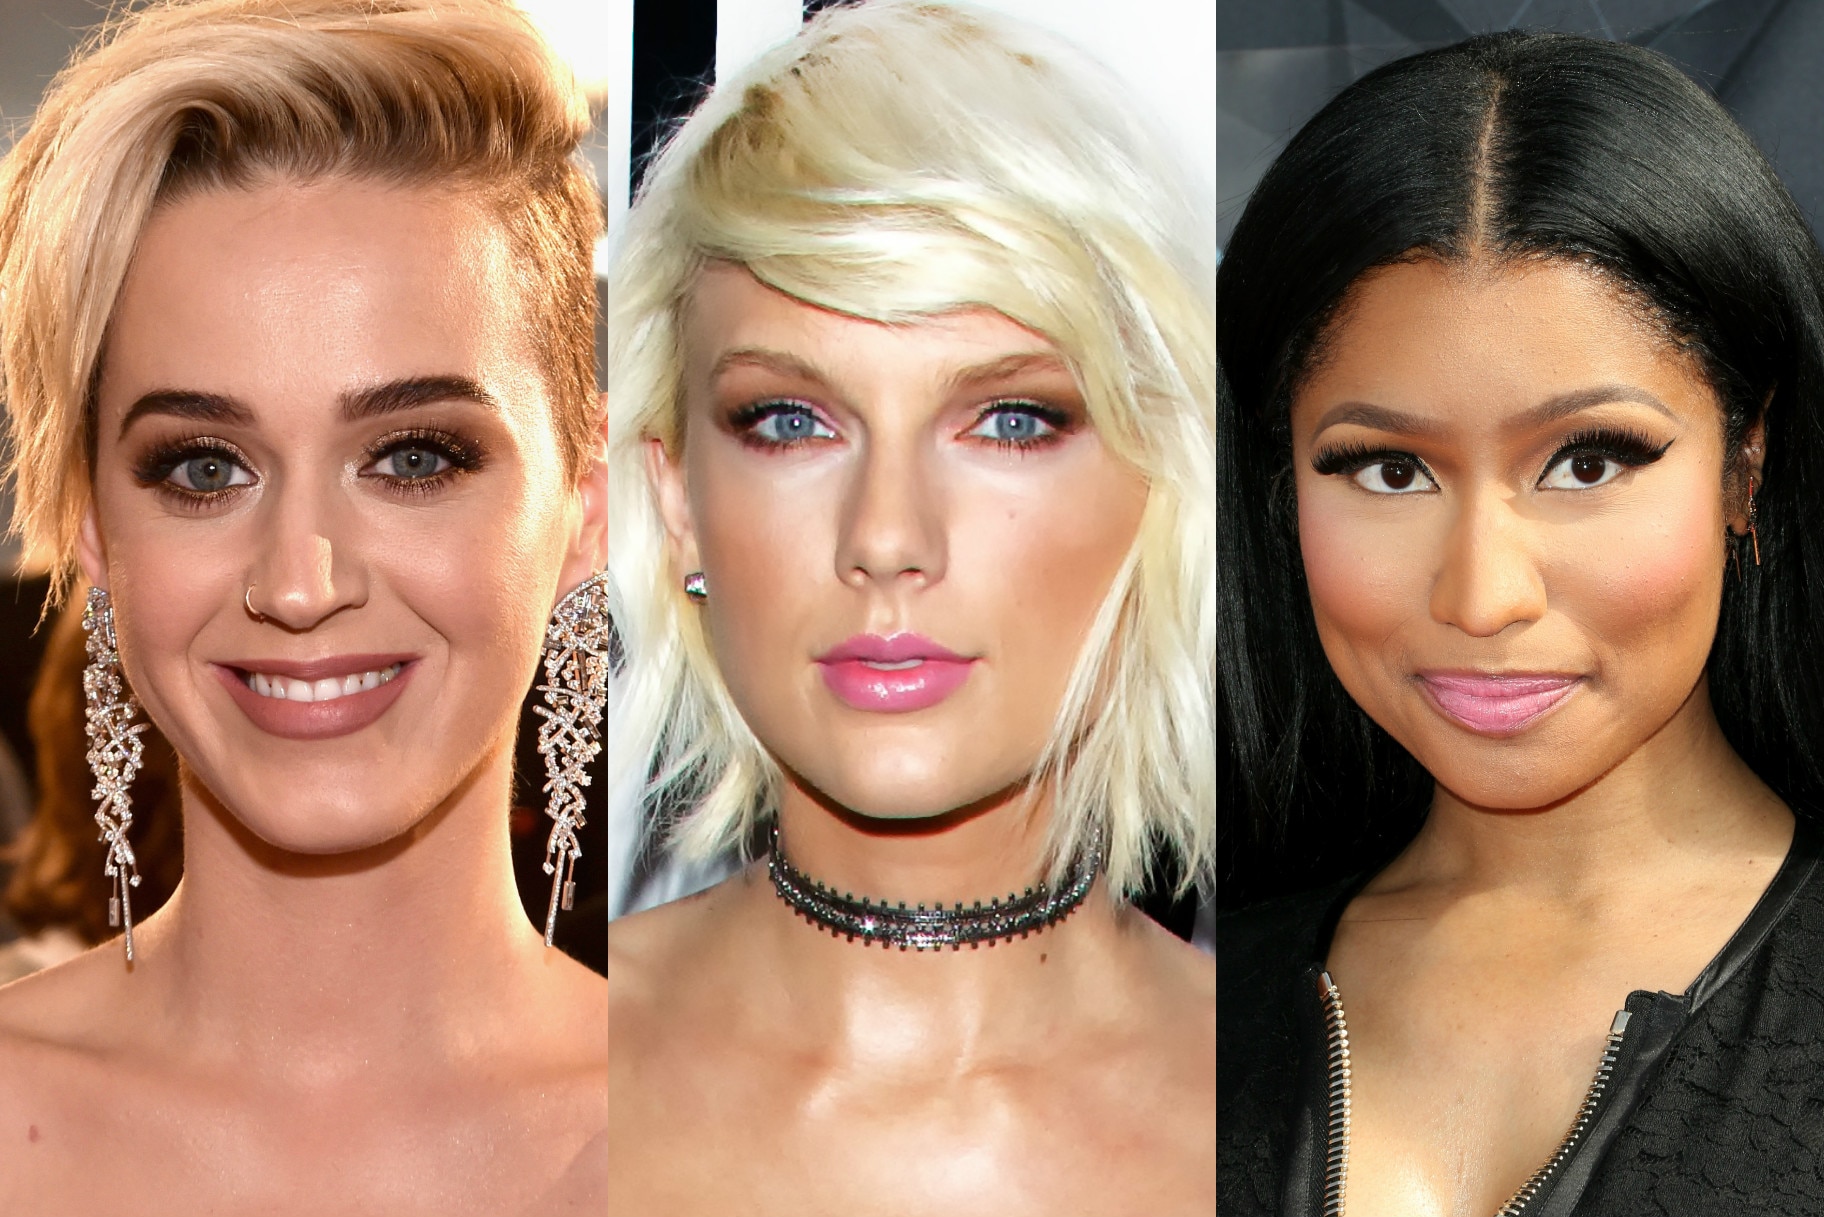 Did Katy Perry And Nicki Minaj Throw Shade At Taylor Swift In Their New